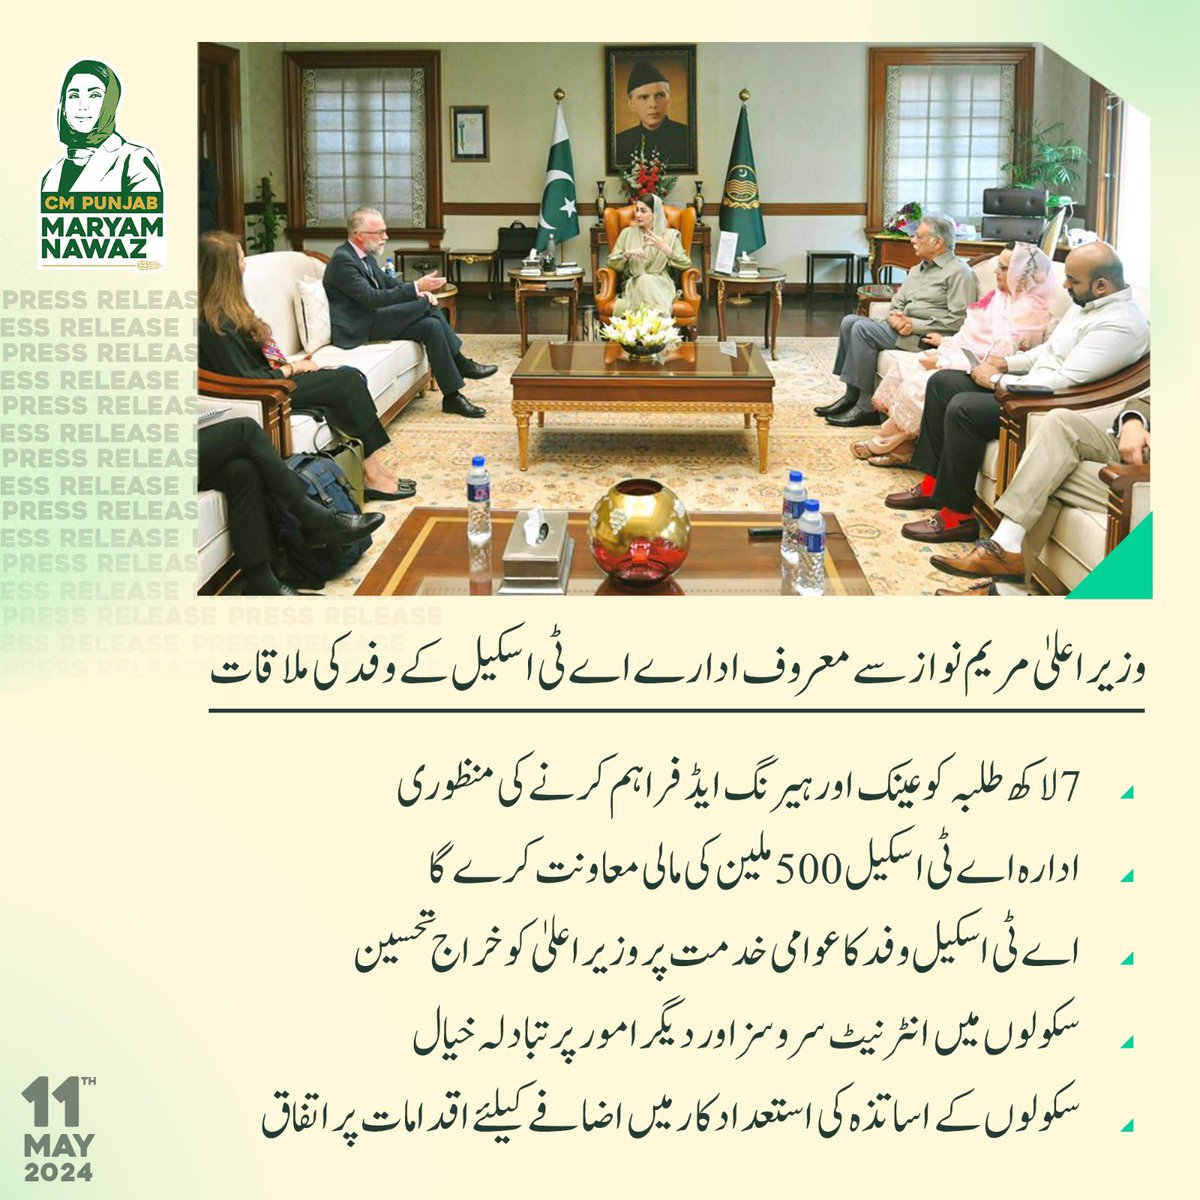 A delegation of AT Scale, a well-known organization, met with Chief Minister Maryam Nawaz. 🔸Approval of glasses and hearing aids to 7 lakh students. 🔸AT Scale will provide Rs. 500 million financial assistance. 🔸Matters pertaining to internet services in schools and other…